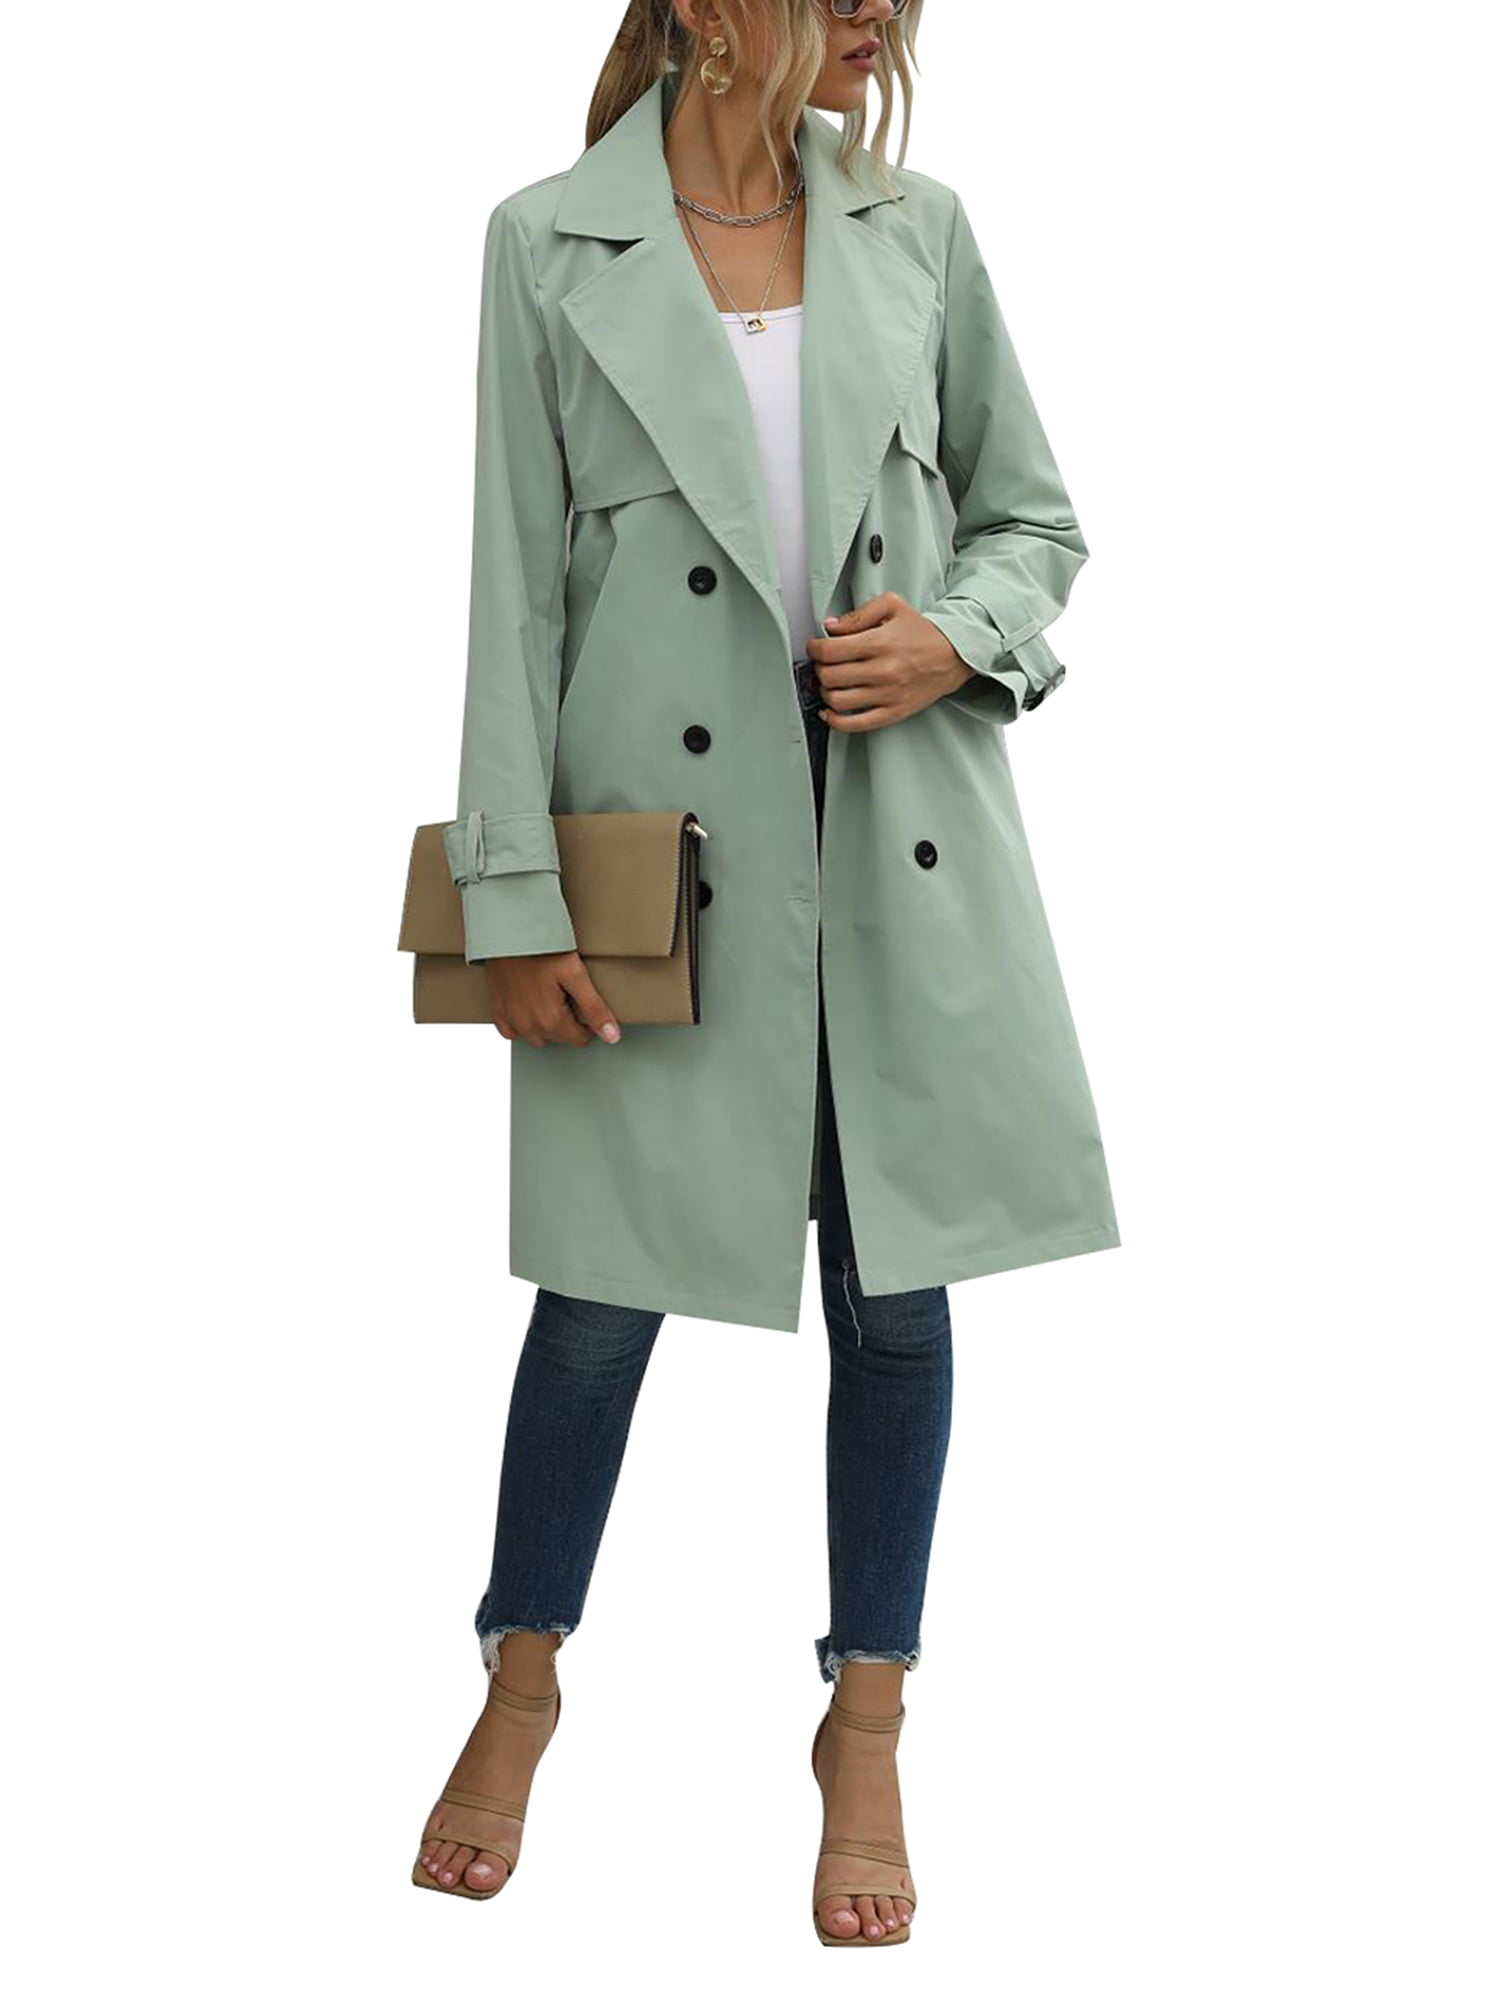 ARTFFEL Womens Regular Fit Double-Breasted Lapel Solid Color Mid Length Trenchcoat Jacket Coat 